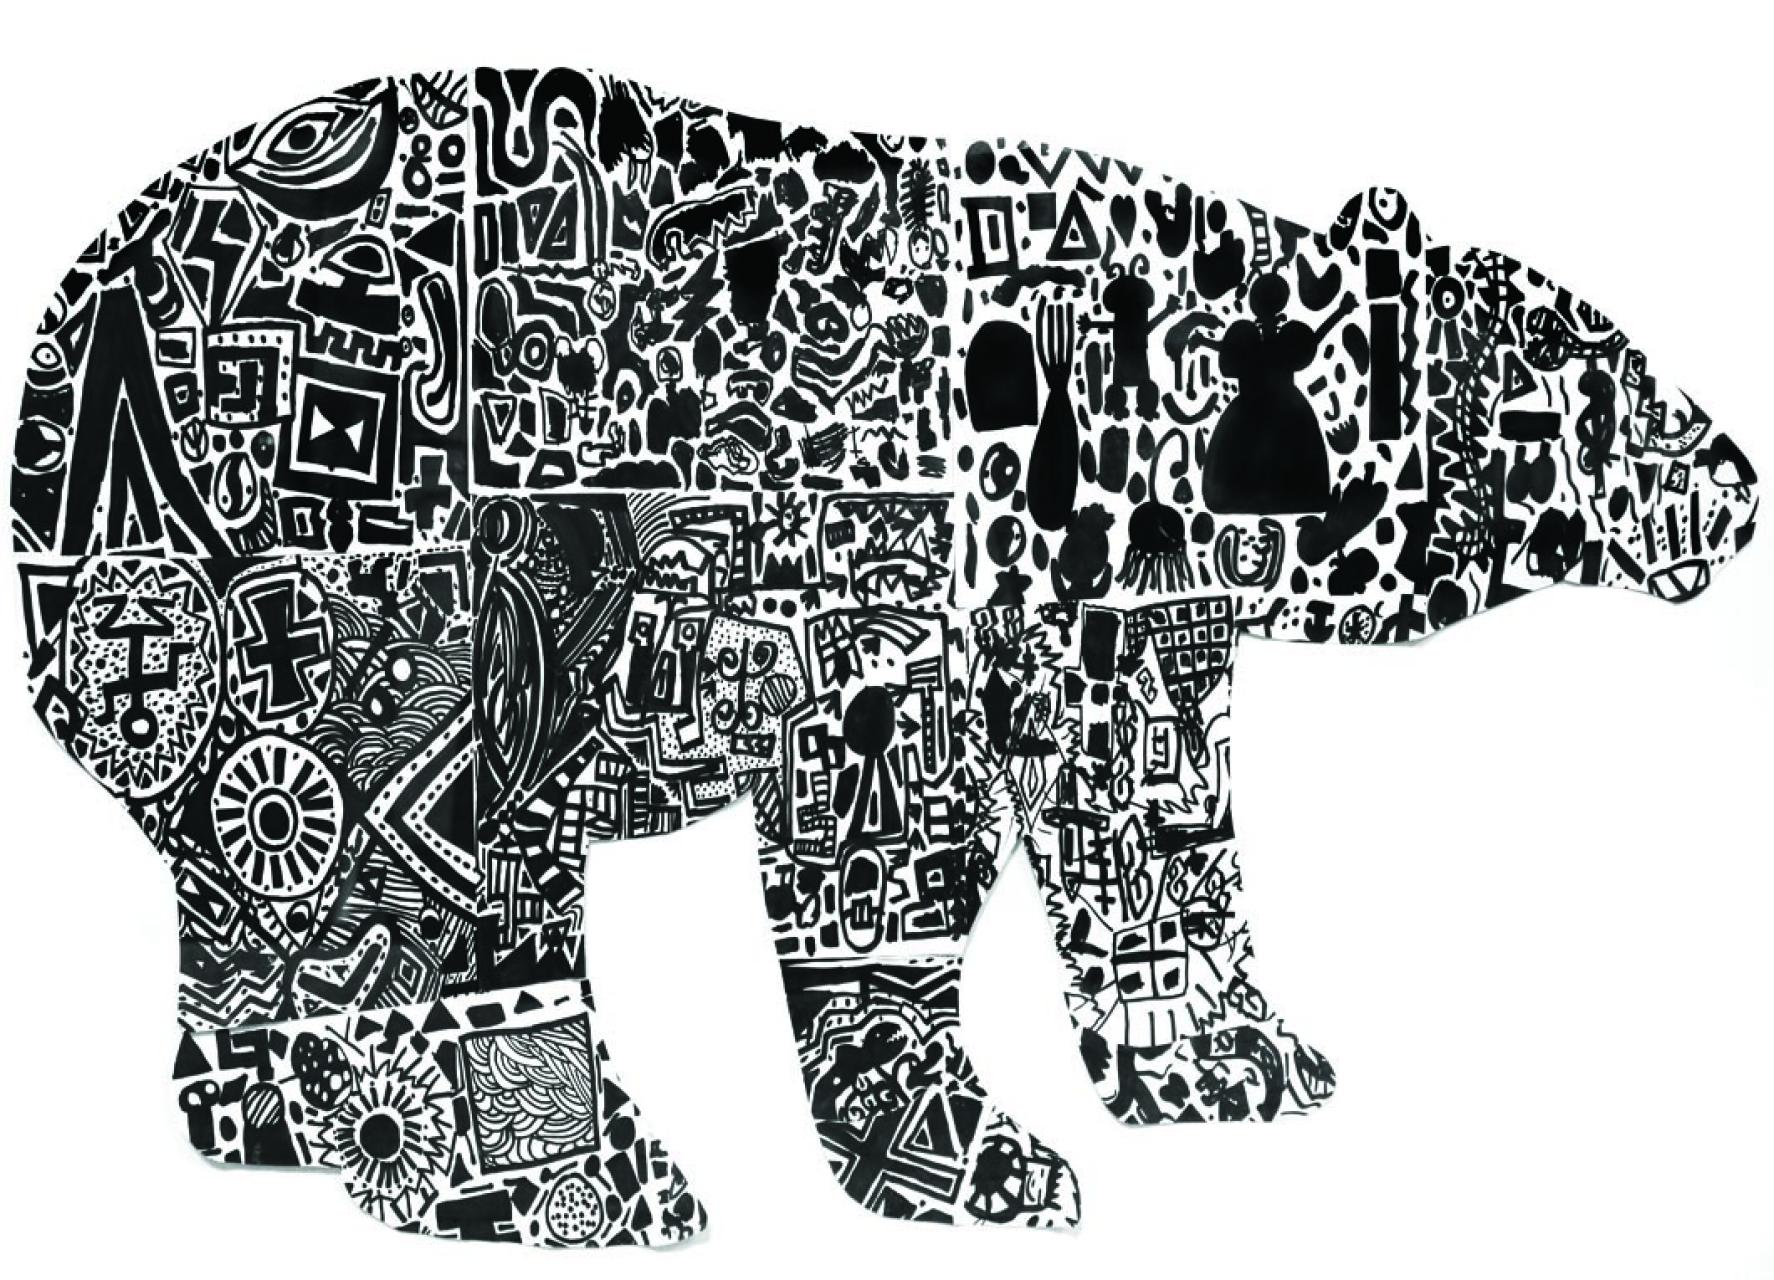 Image of a print entitled Nanuq, or the polar bear, created by students at the Ottawa Inuit Children's Centre